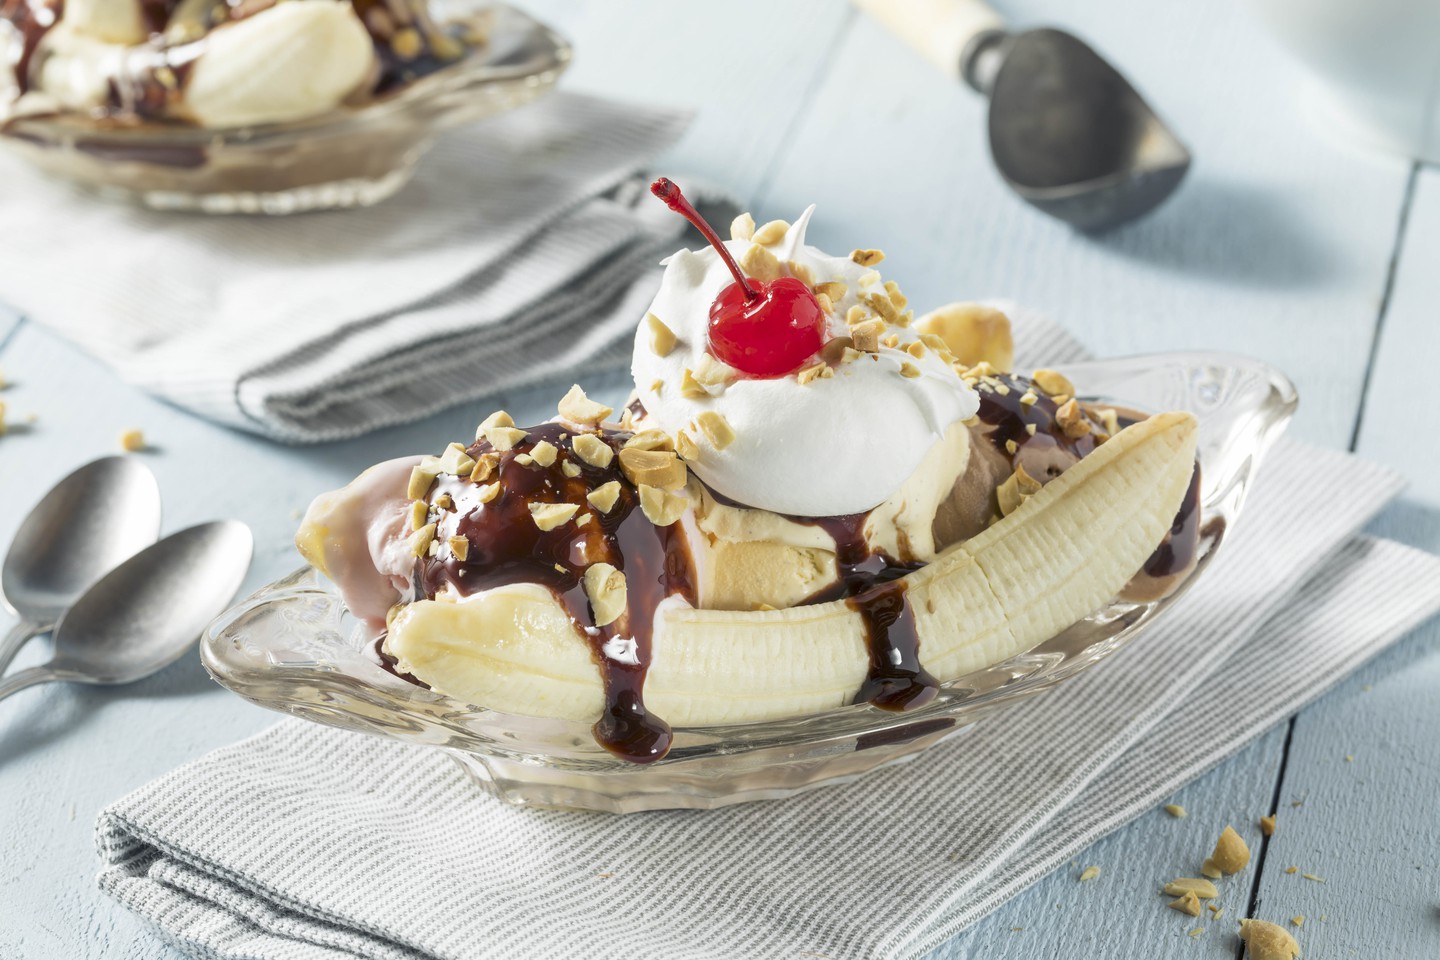 Eat Some 🍰 AI Randomly Generated Desserts to Determine If You’re an Introvert or Extrovert 😃 Banana Split Sundae